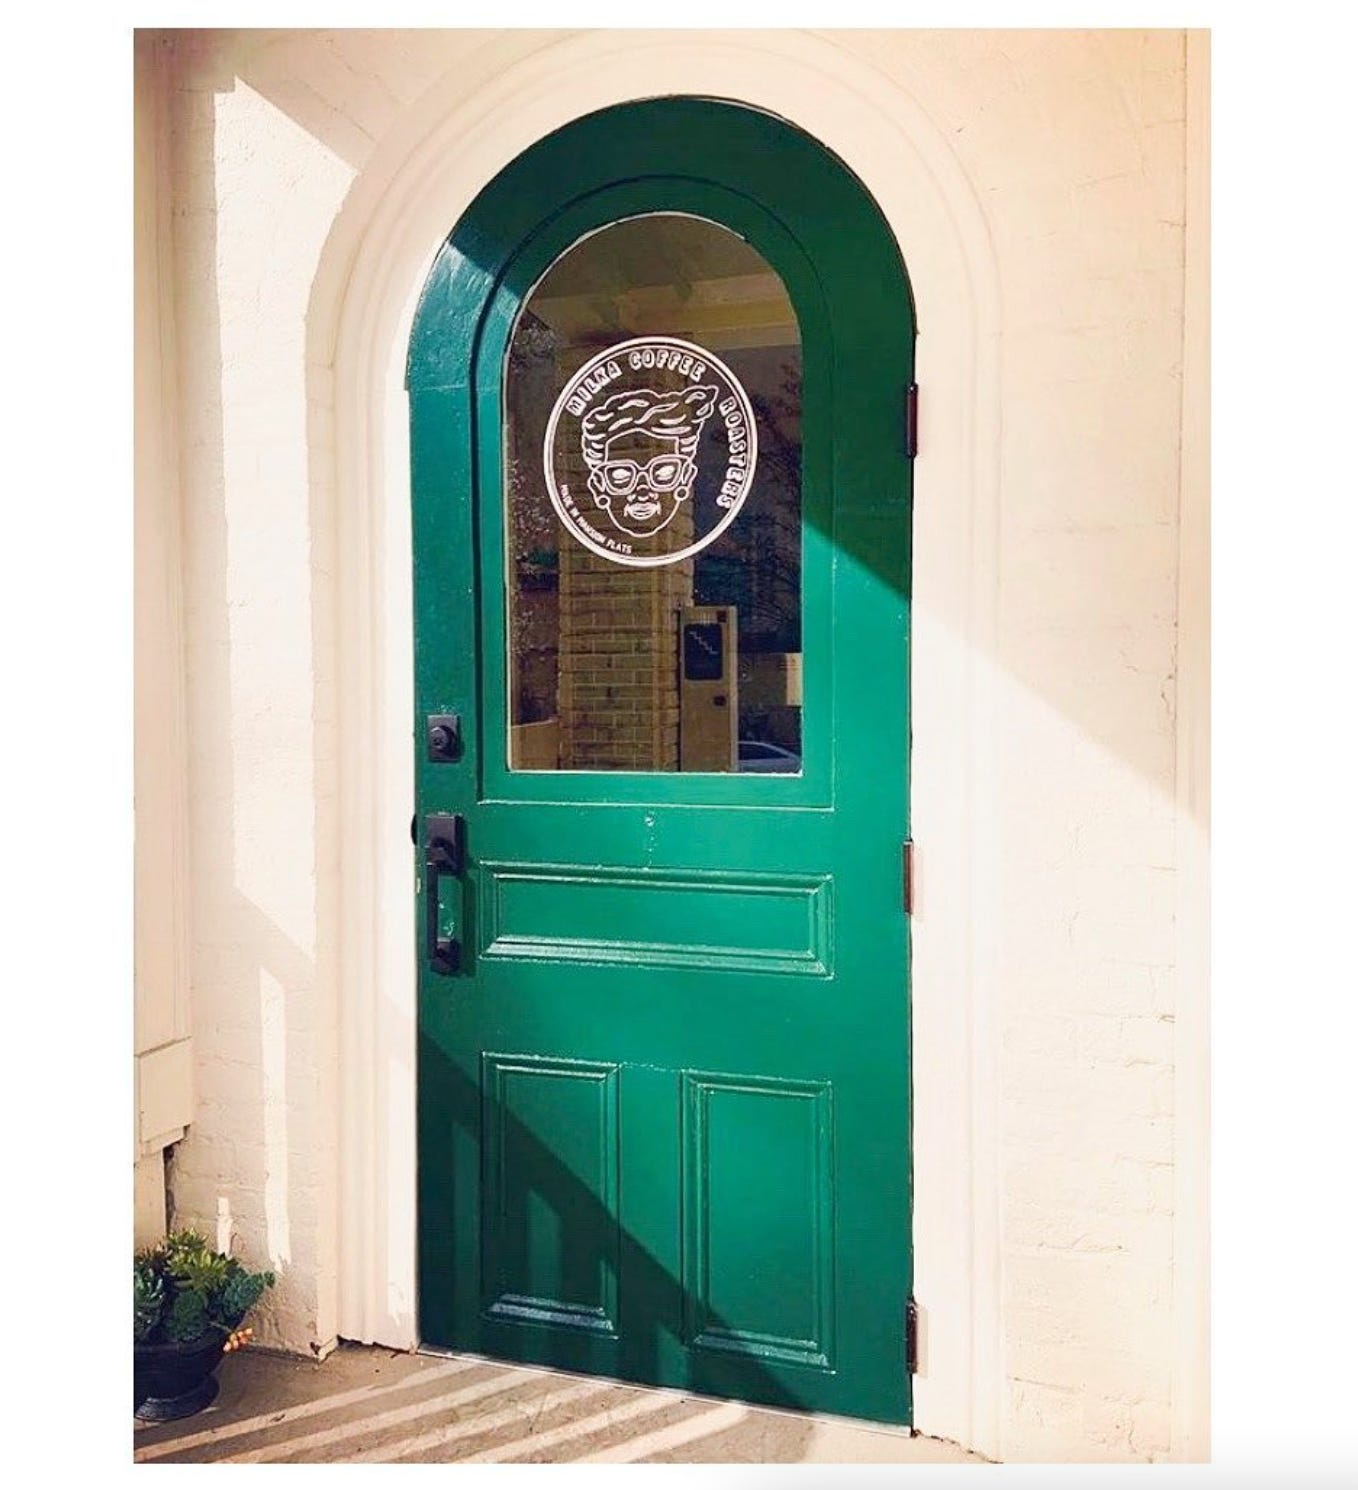 A close-up of an arched green door in a cream colored home.